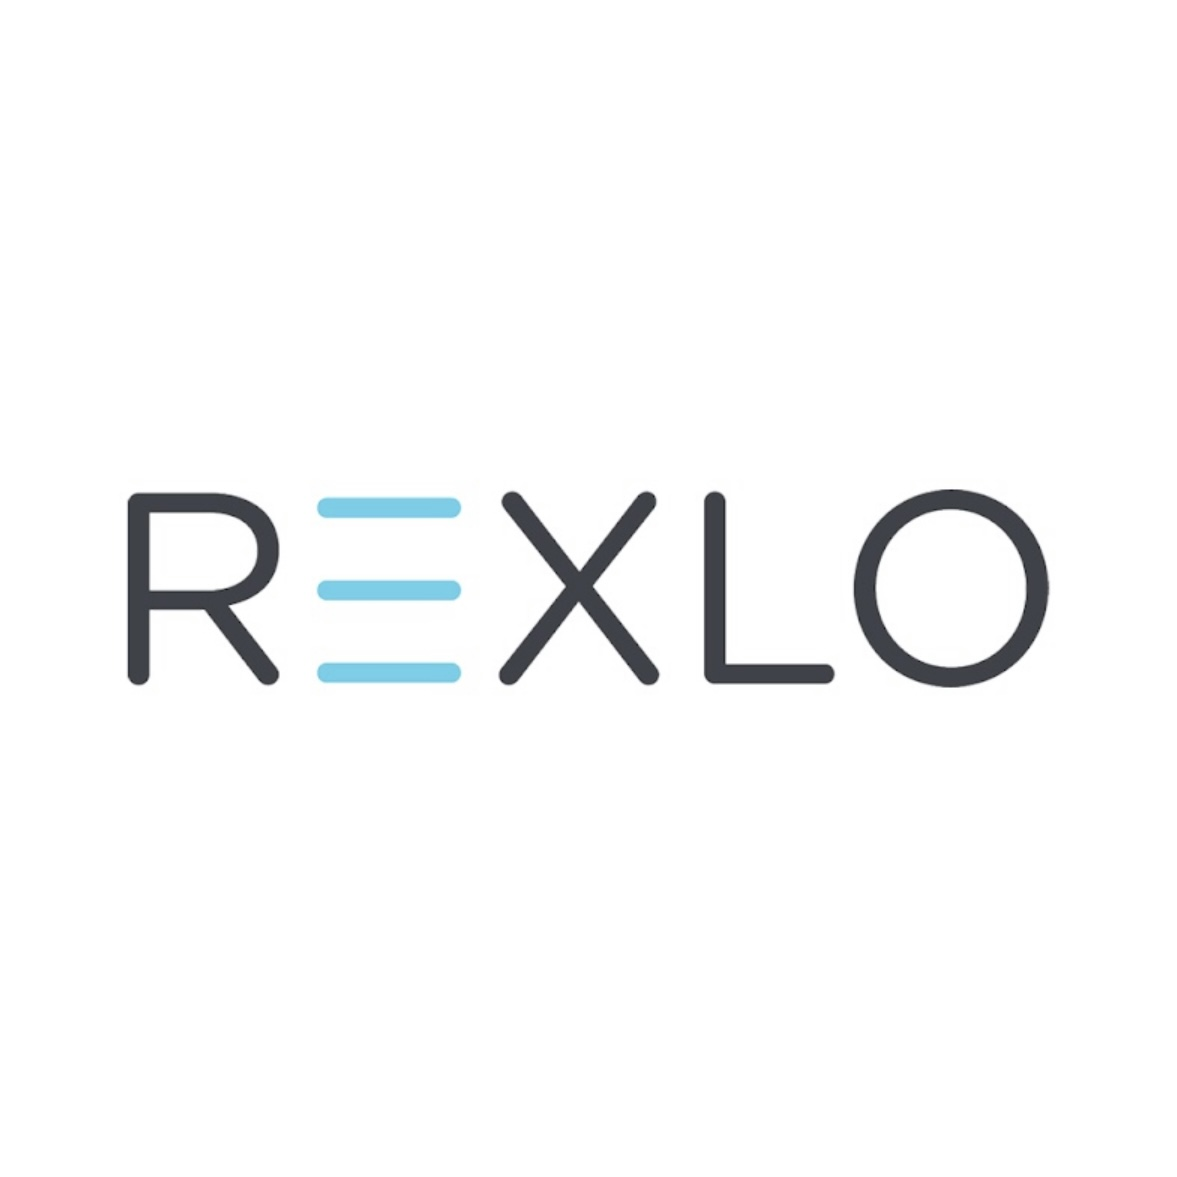 Rexlo Brings Innovative Web Design to Help Small Businesses Grow with Elegant Solutions